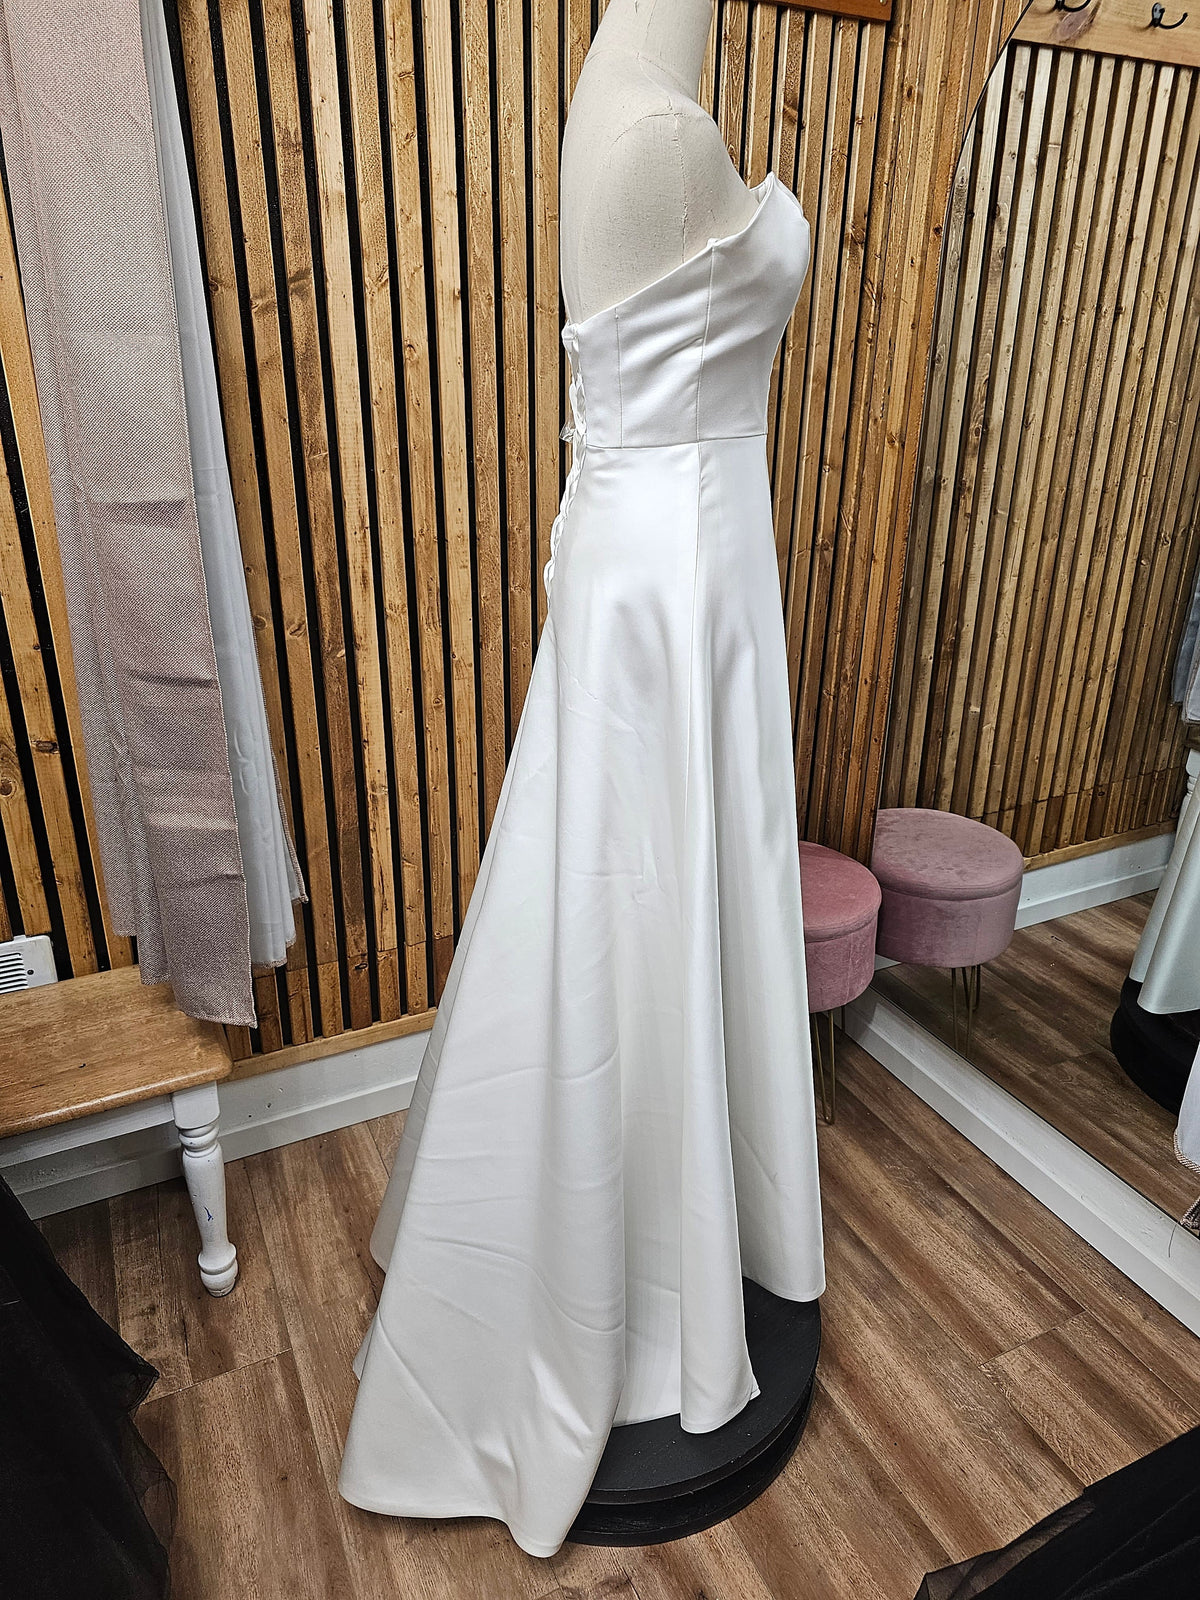 Minimalist Simple Sleeveless Strapless Straight Neckline Wedding Dress Bridal Gown Aline Open Back Corset Lace Up Backless Design